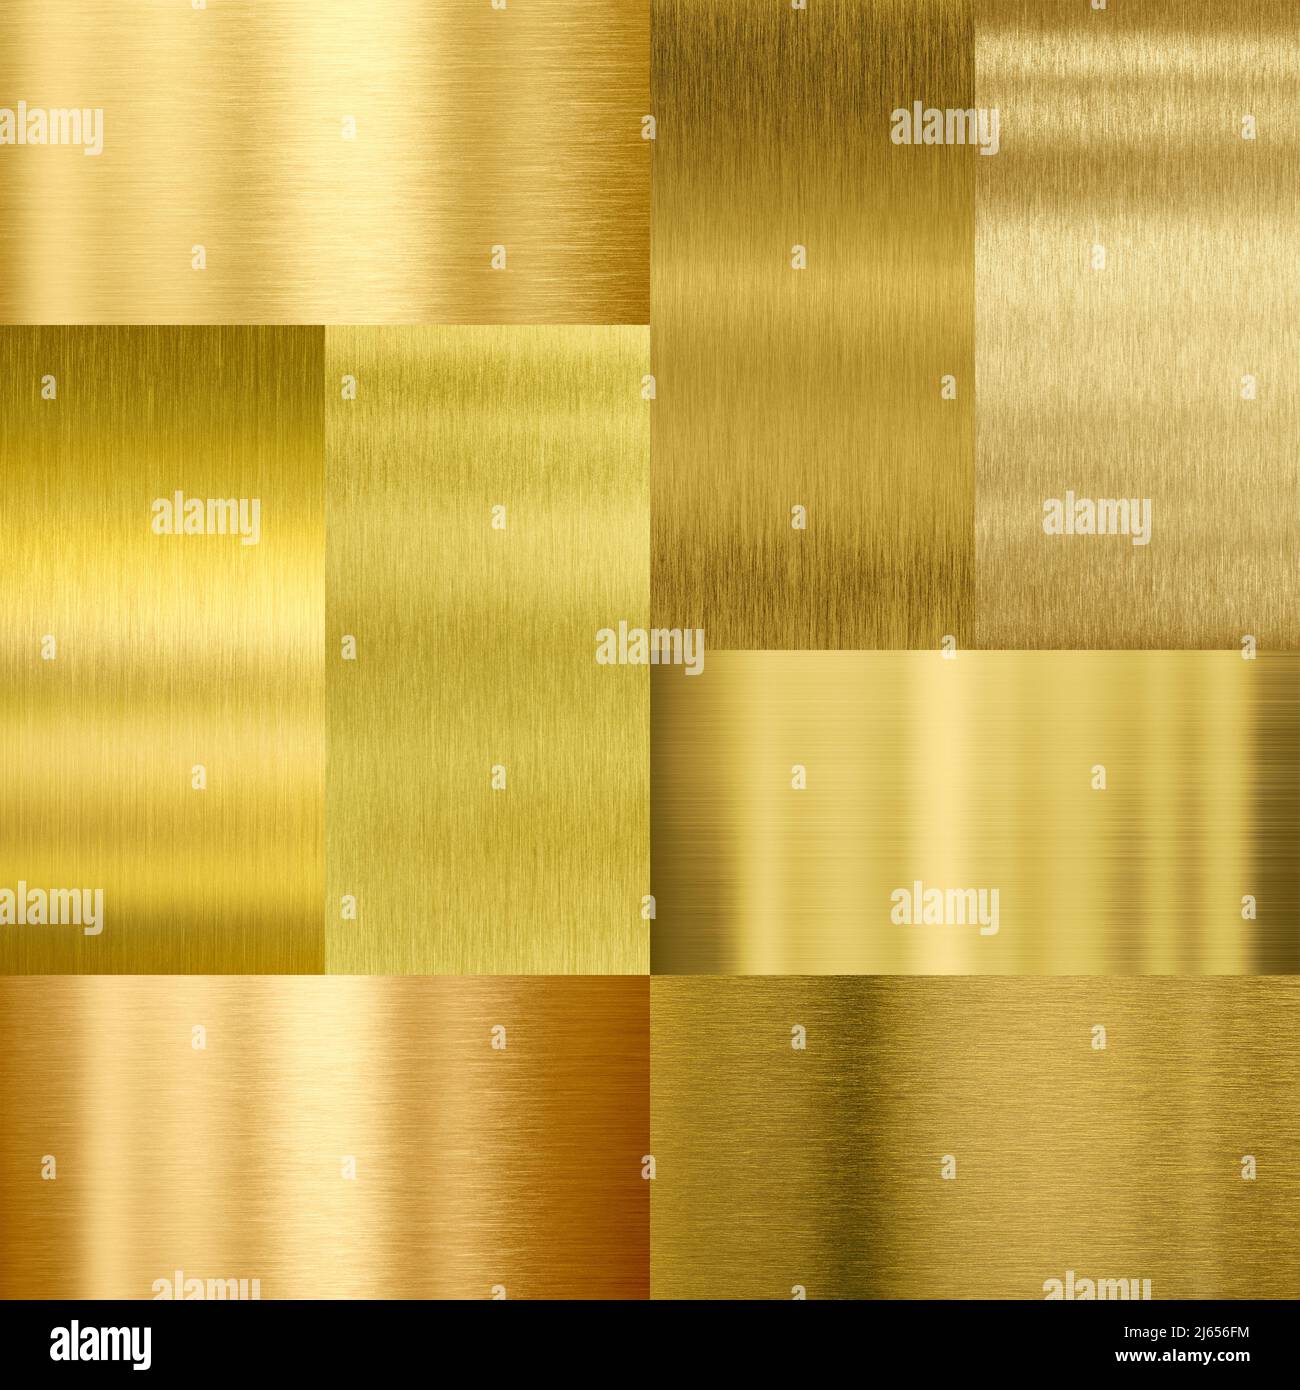 various brushed gold metal textures collection Stock Photo